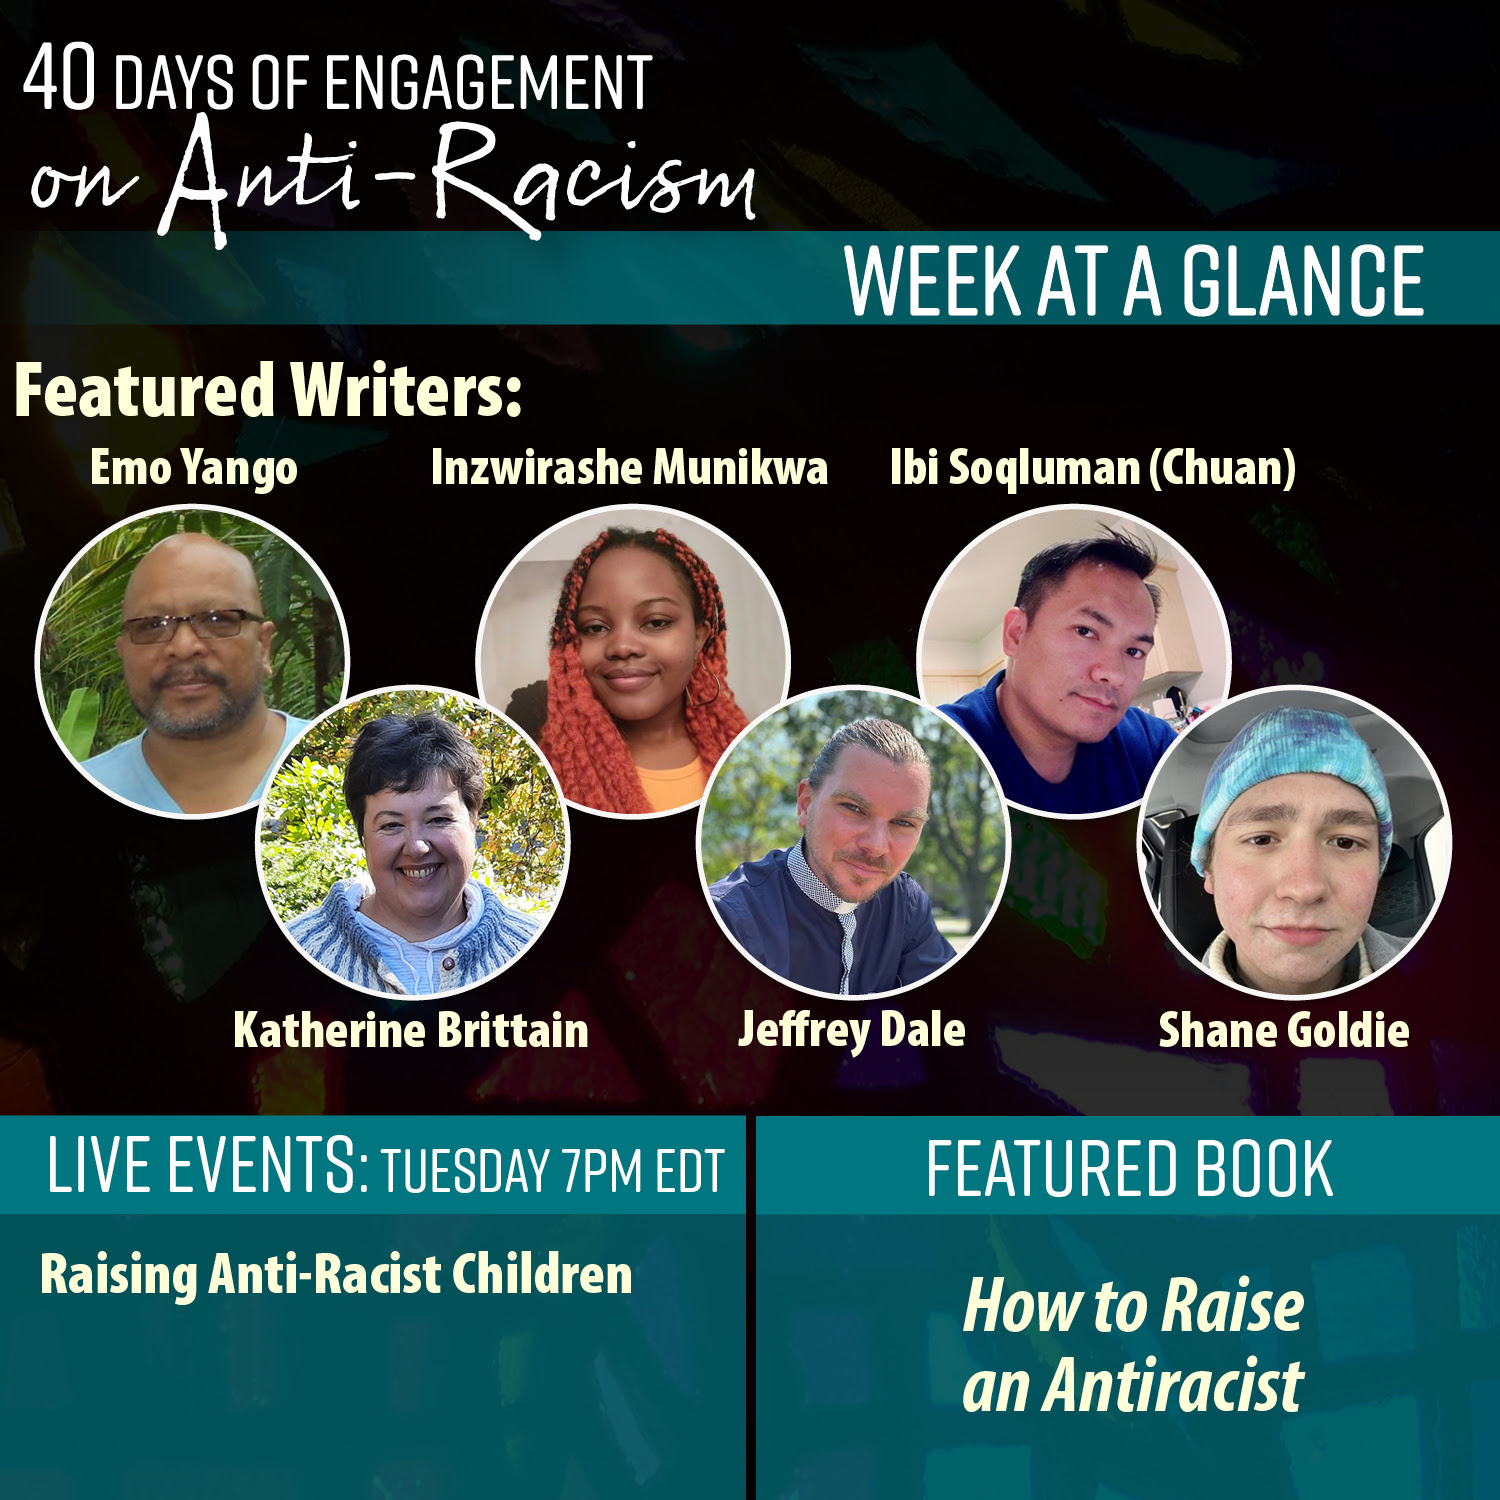 40 Days of Engagement on Anti-Racism week at a glance